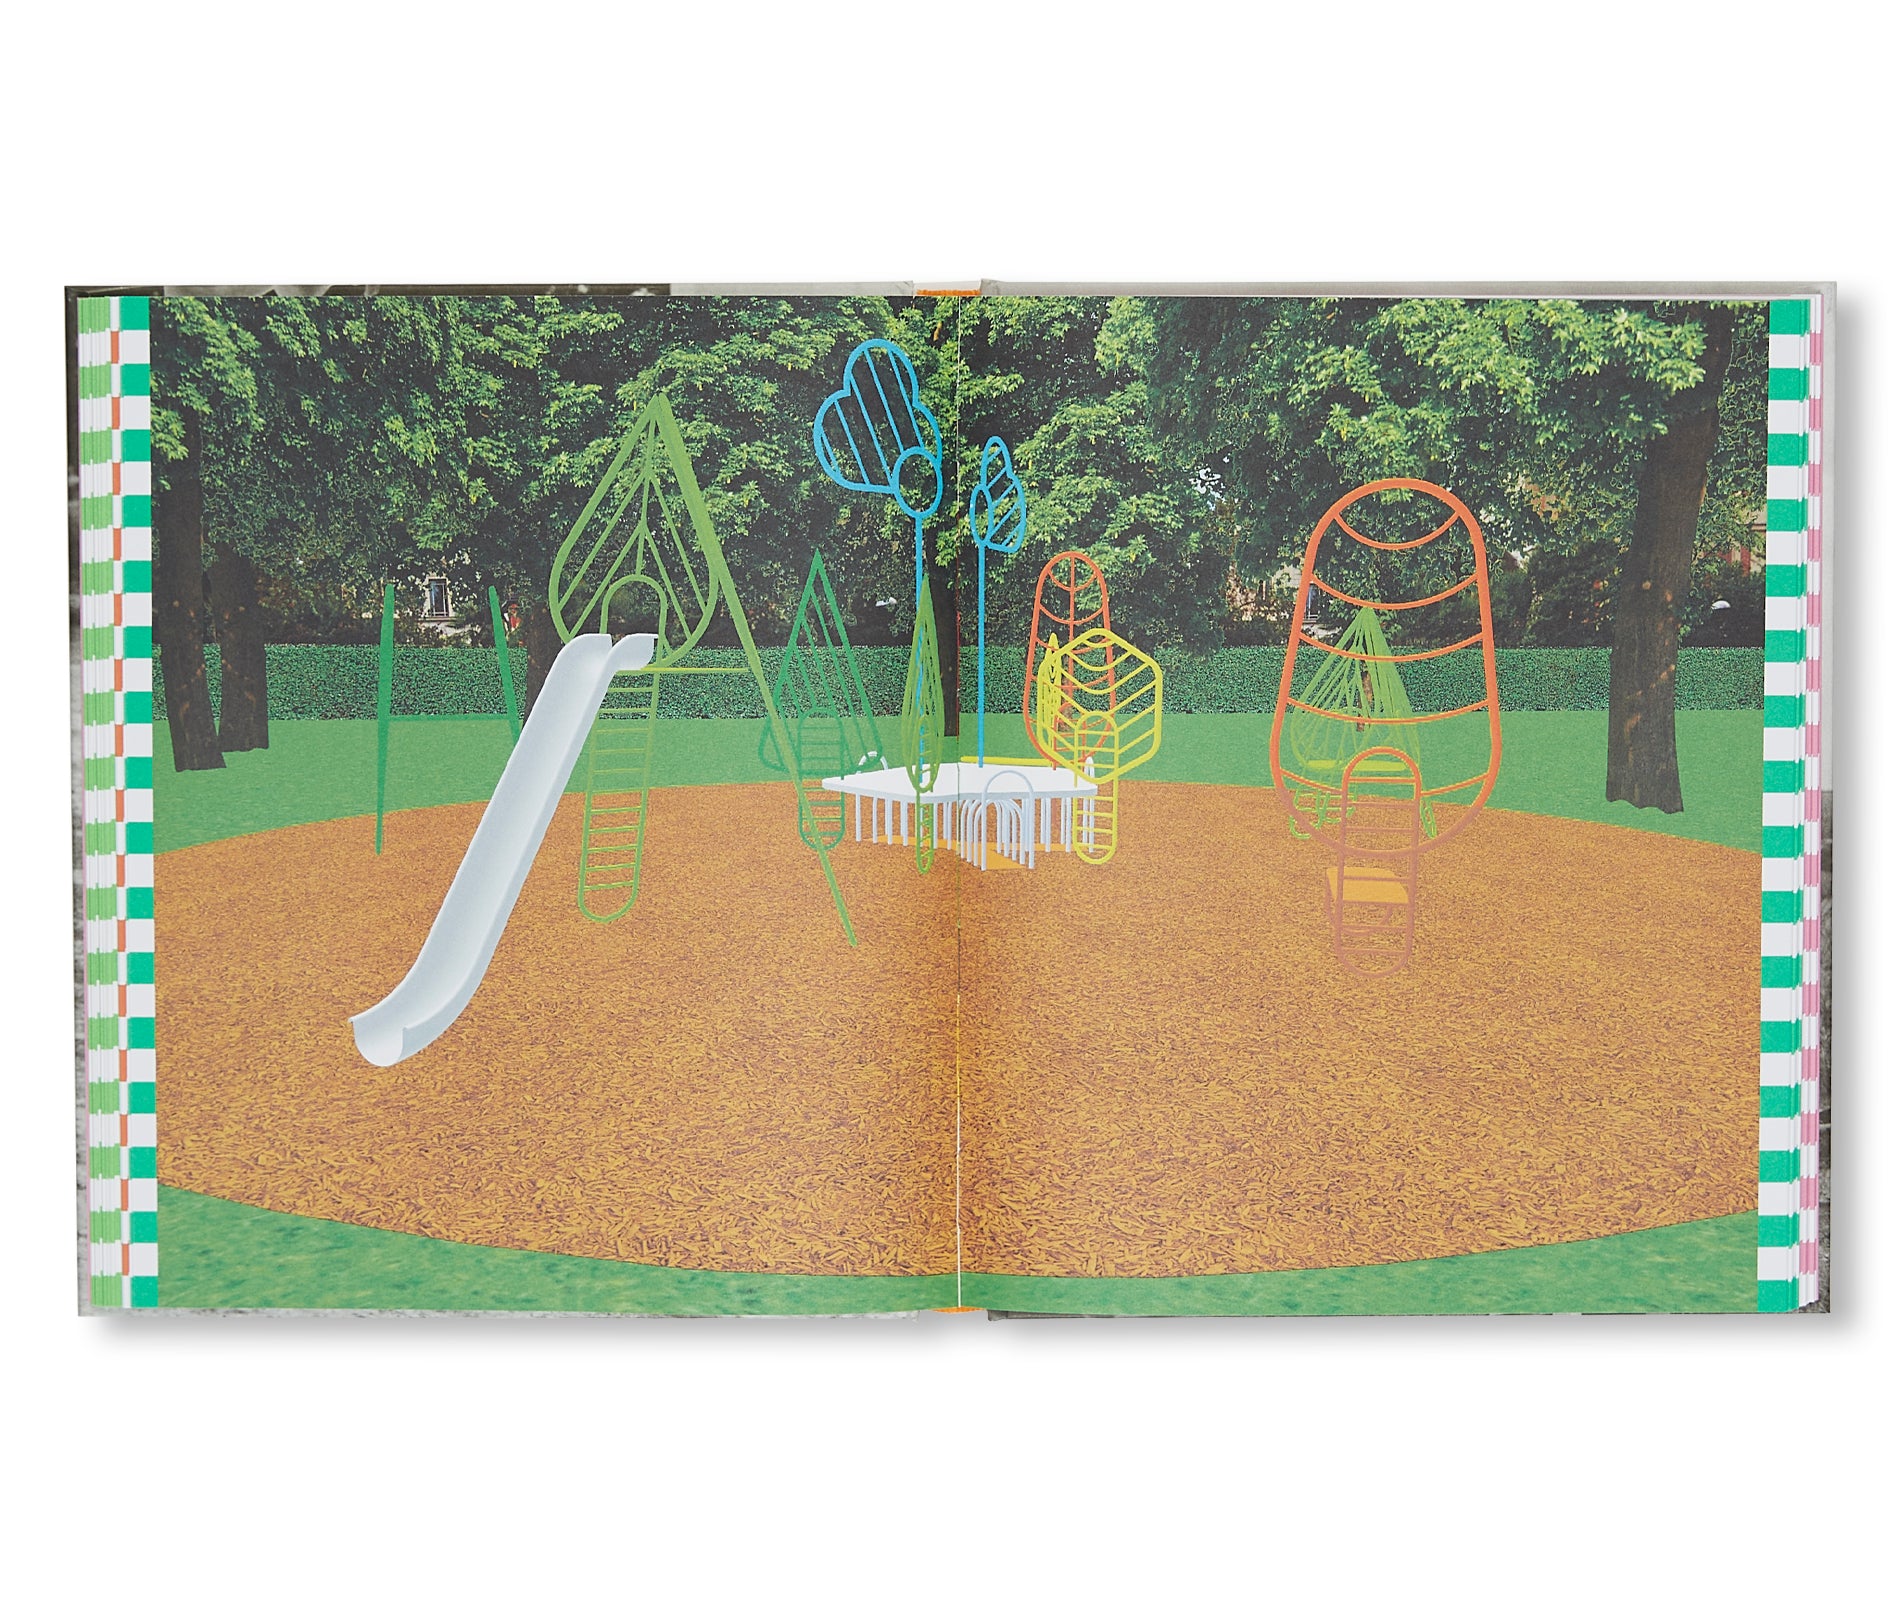 PLAYGROUNDING: THE PLAYGROUND AS A SYMBOLIC FORM OF SOCIETY AND DESIGN CULTURE by Domitilla Dardi